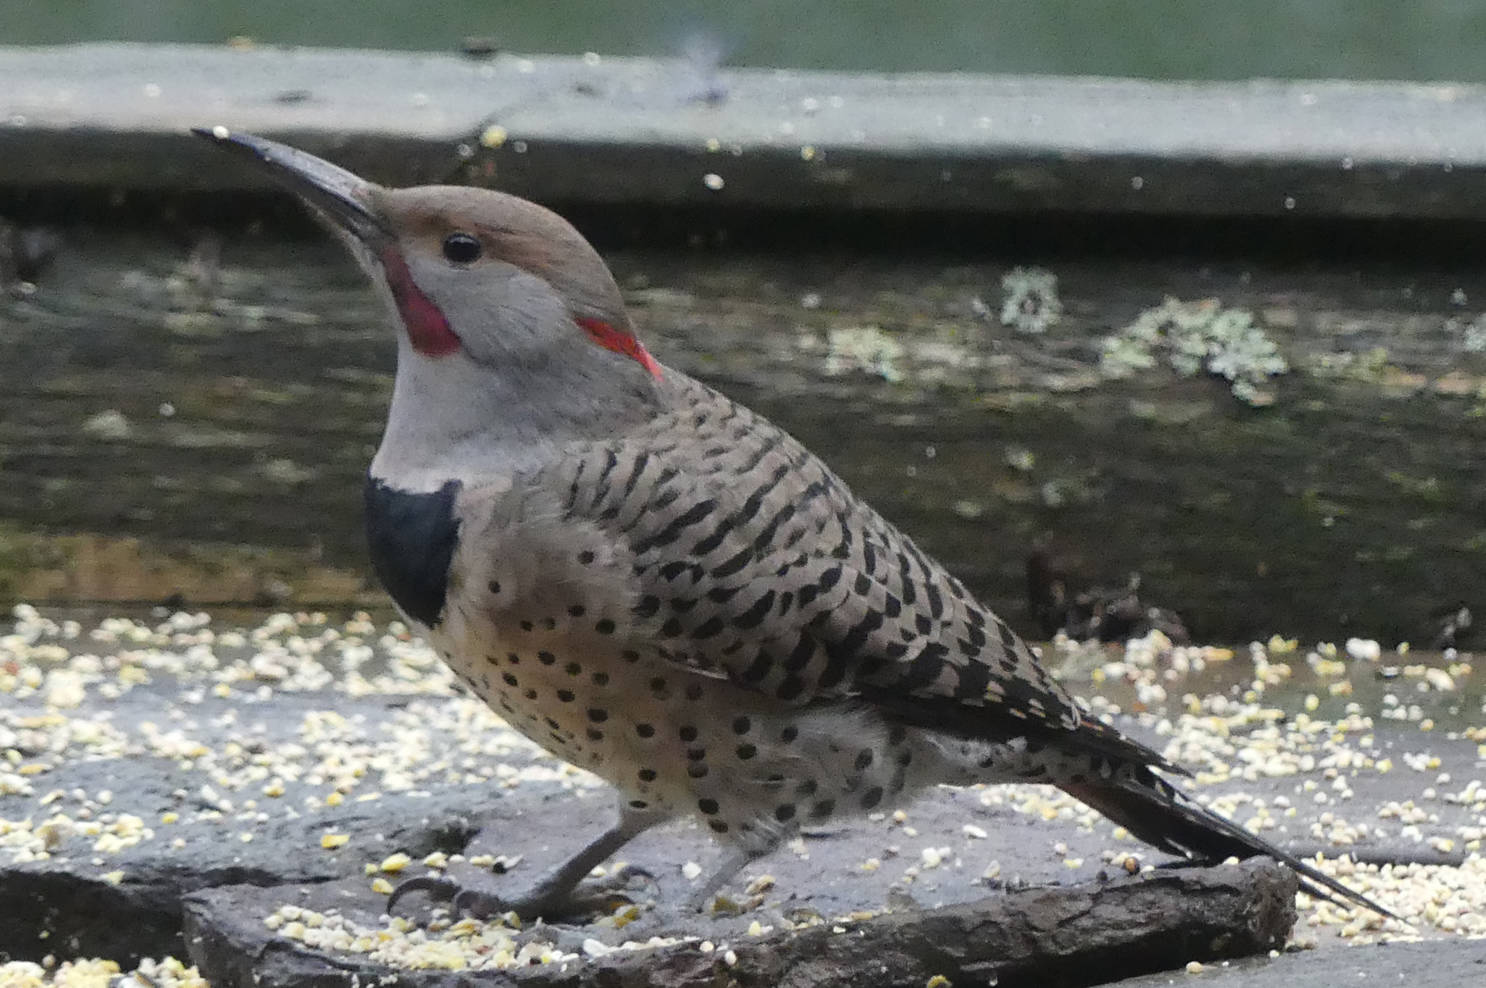 A male northern flicker at Tee Harbor this year shows the red face mark of the western form and the red nape mark of the eastern form, so it may be an intergrade. (Courtesy Photo / Bob Armstrong)